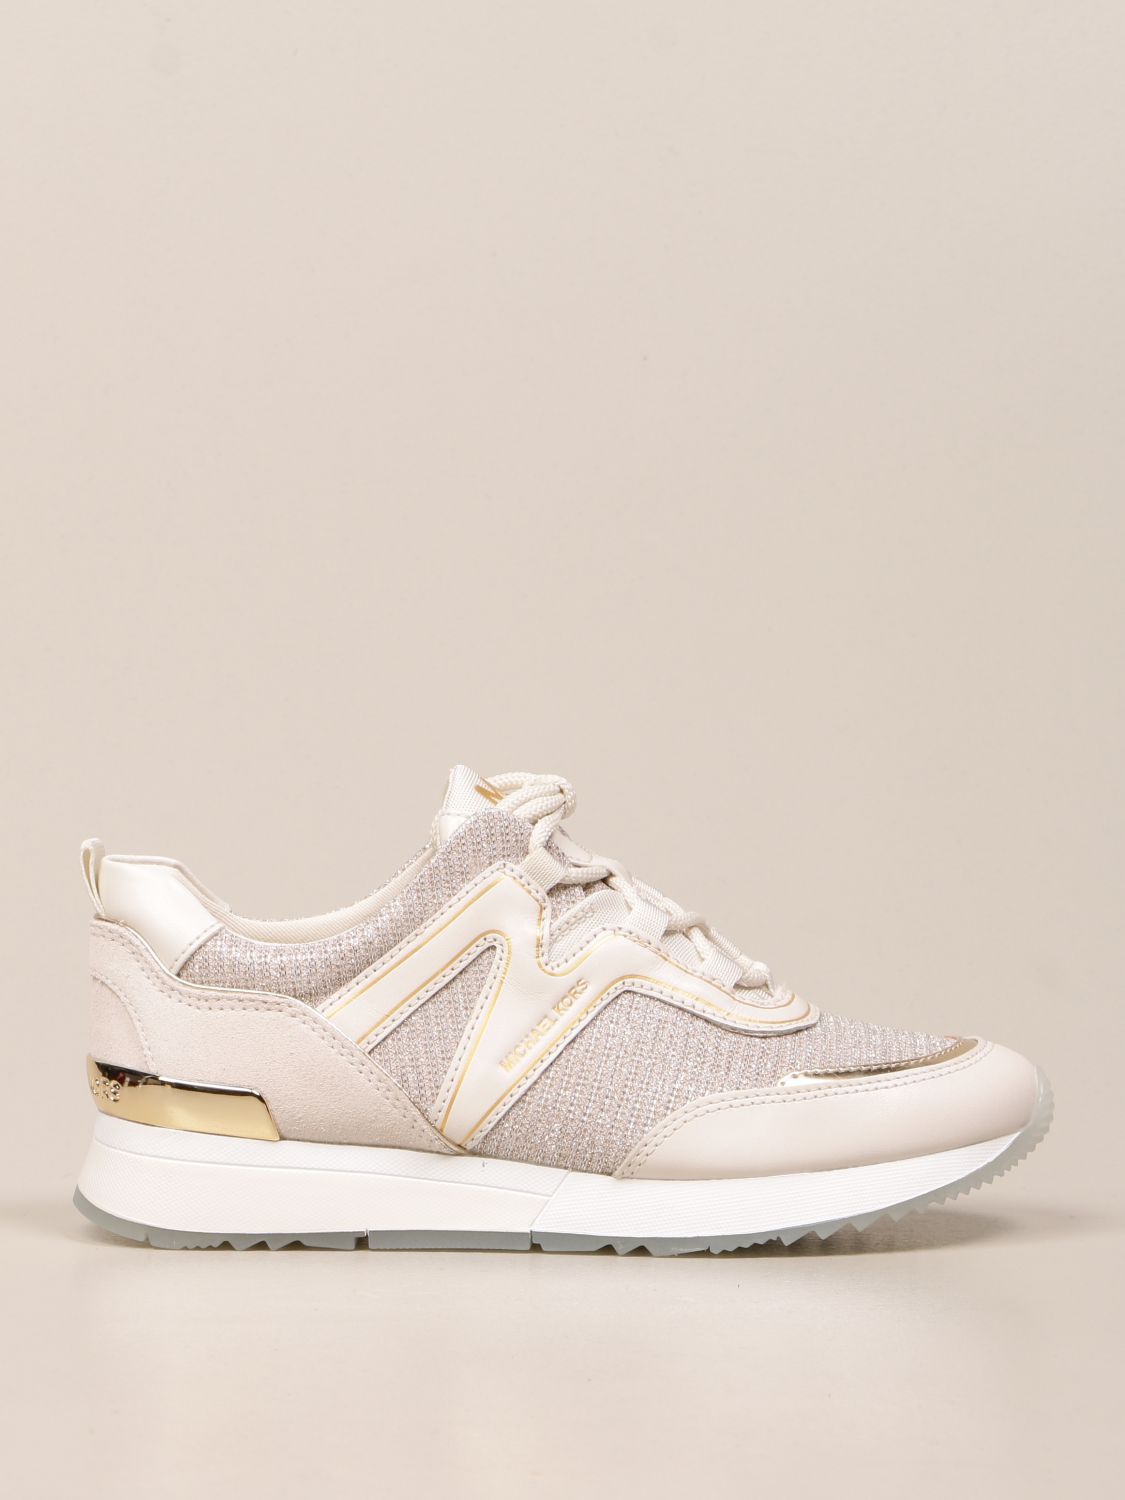 MICHAEL KORS: Michael sneakers in lurex canvas and leather - Champagne | Michael  Kors sneakers 43S1PIFS4D online on 